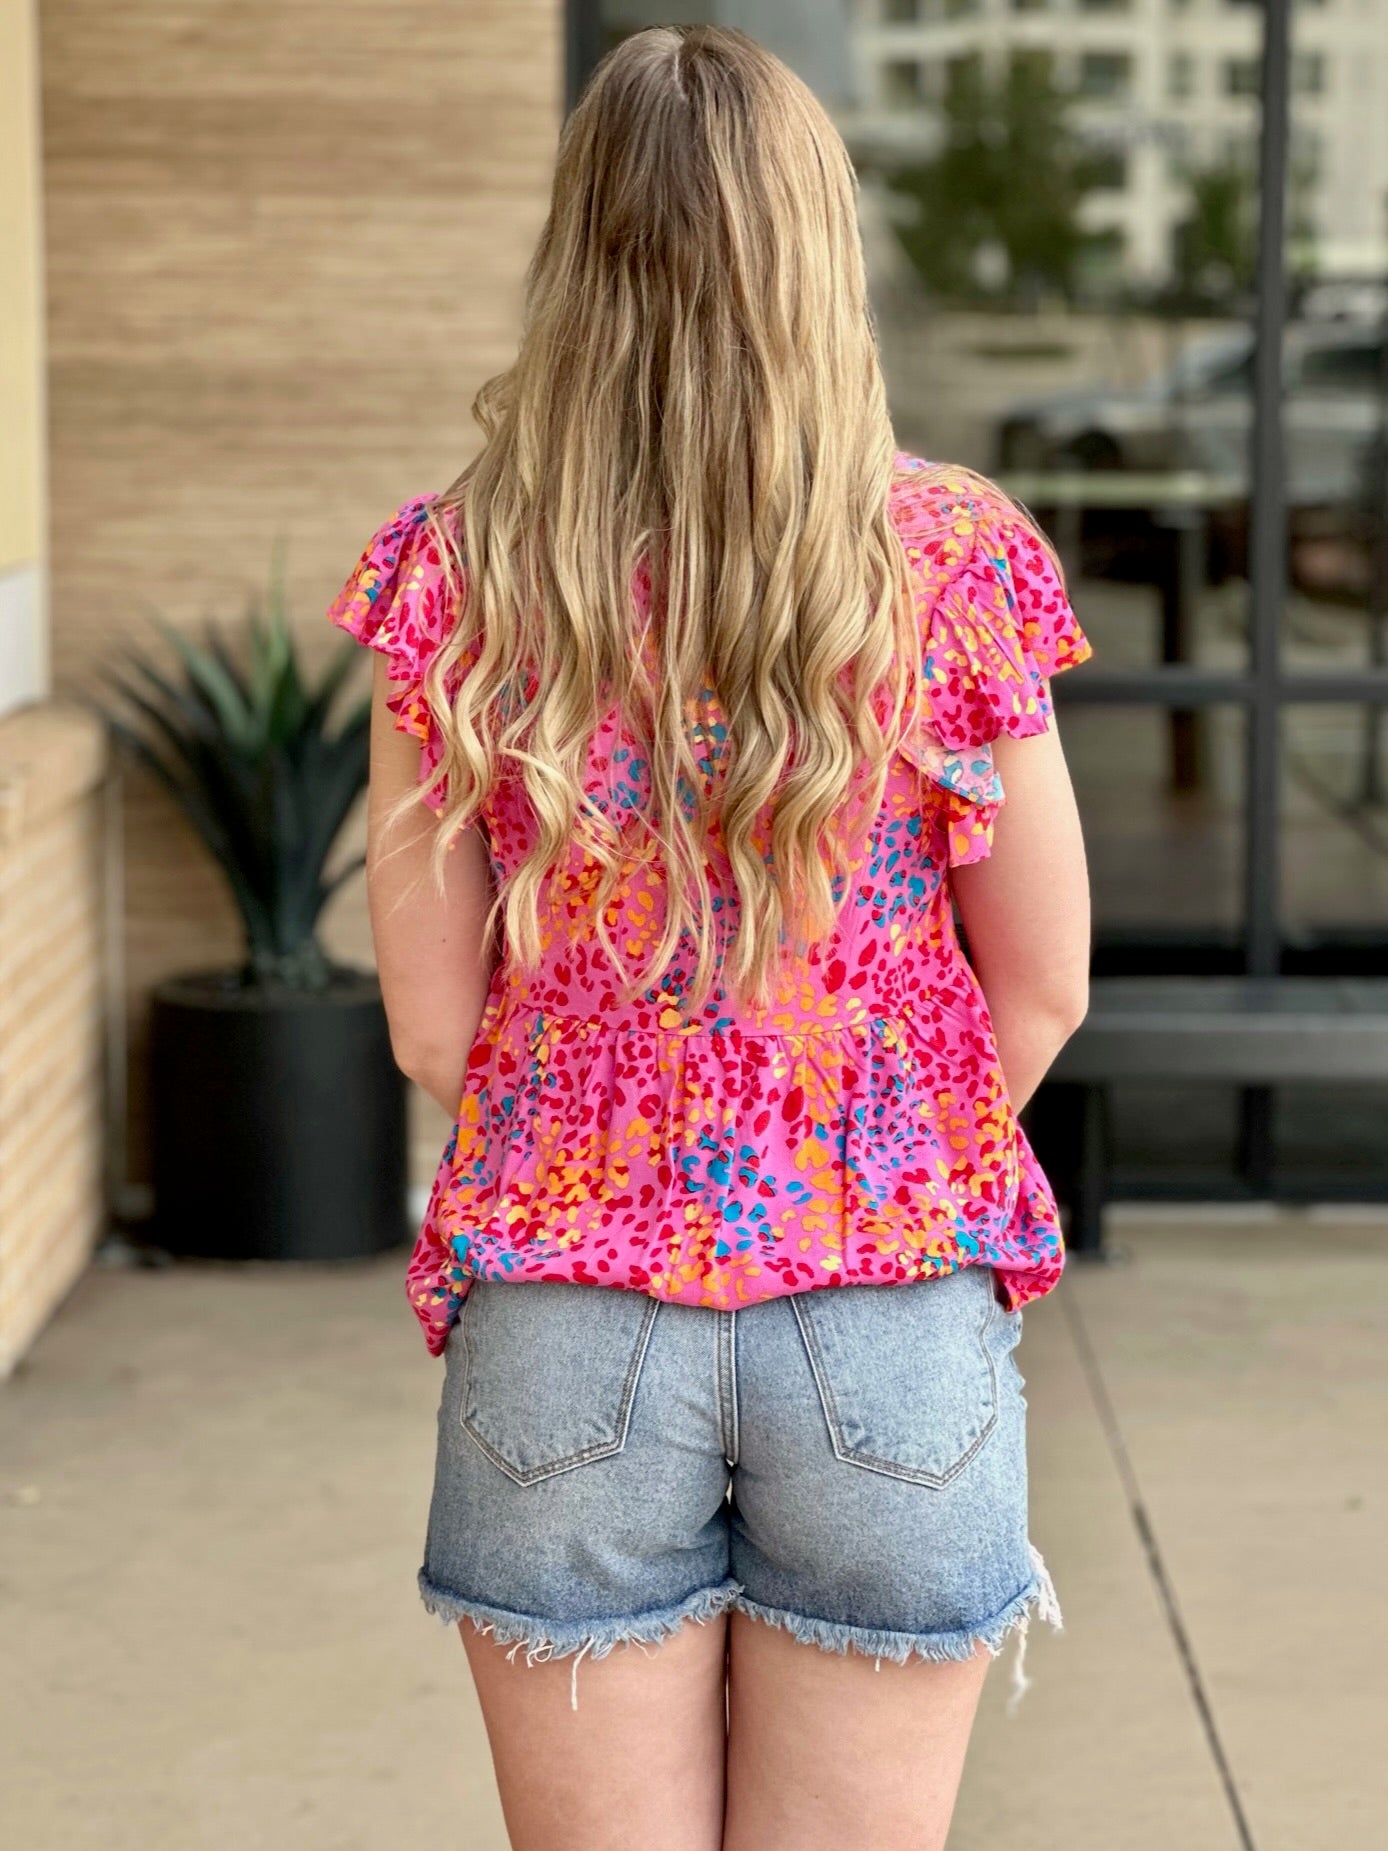 Lexi in hot pink blouse back view